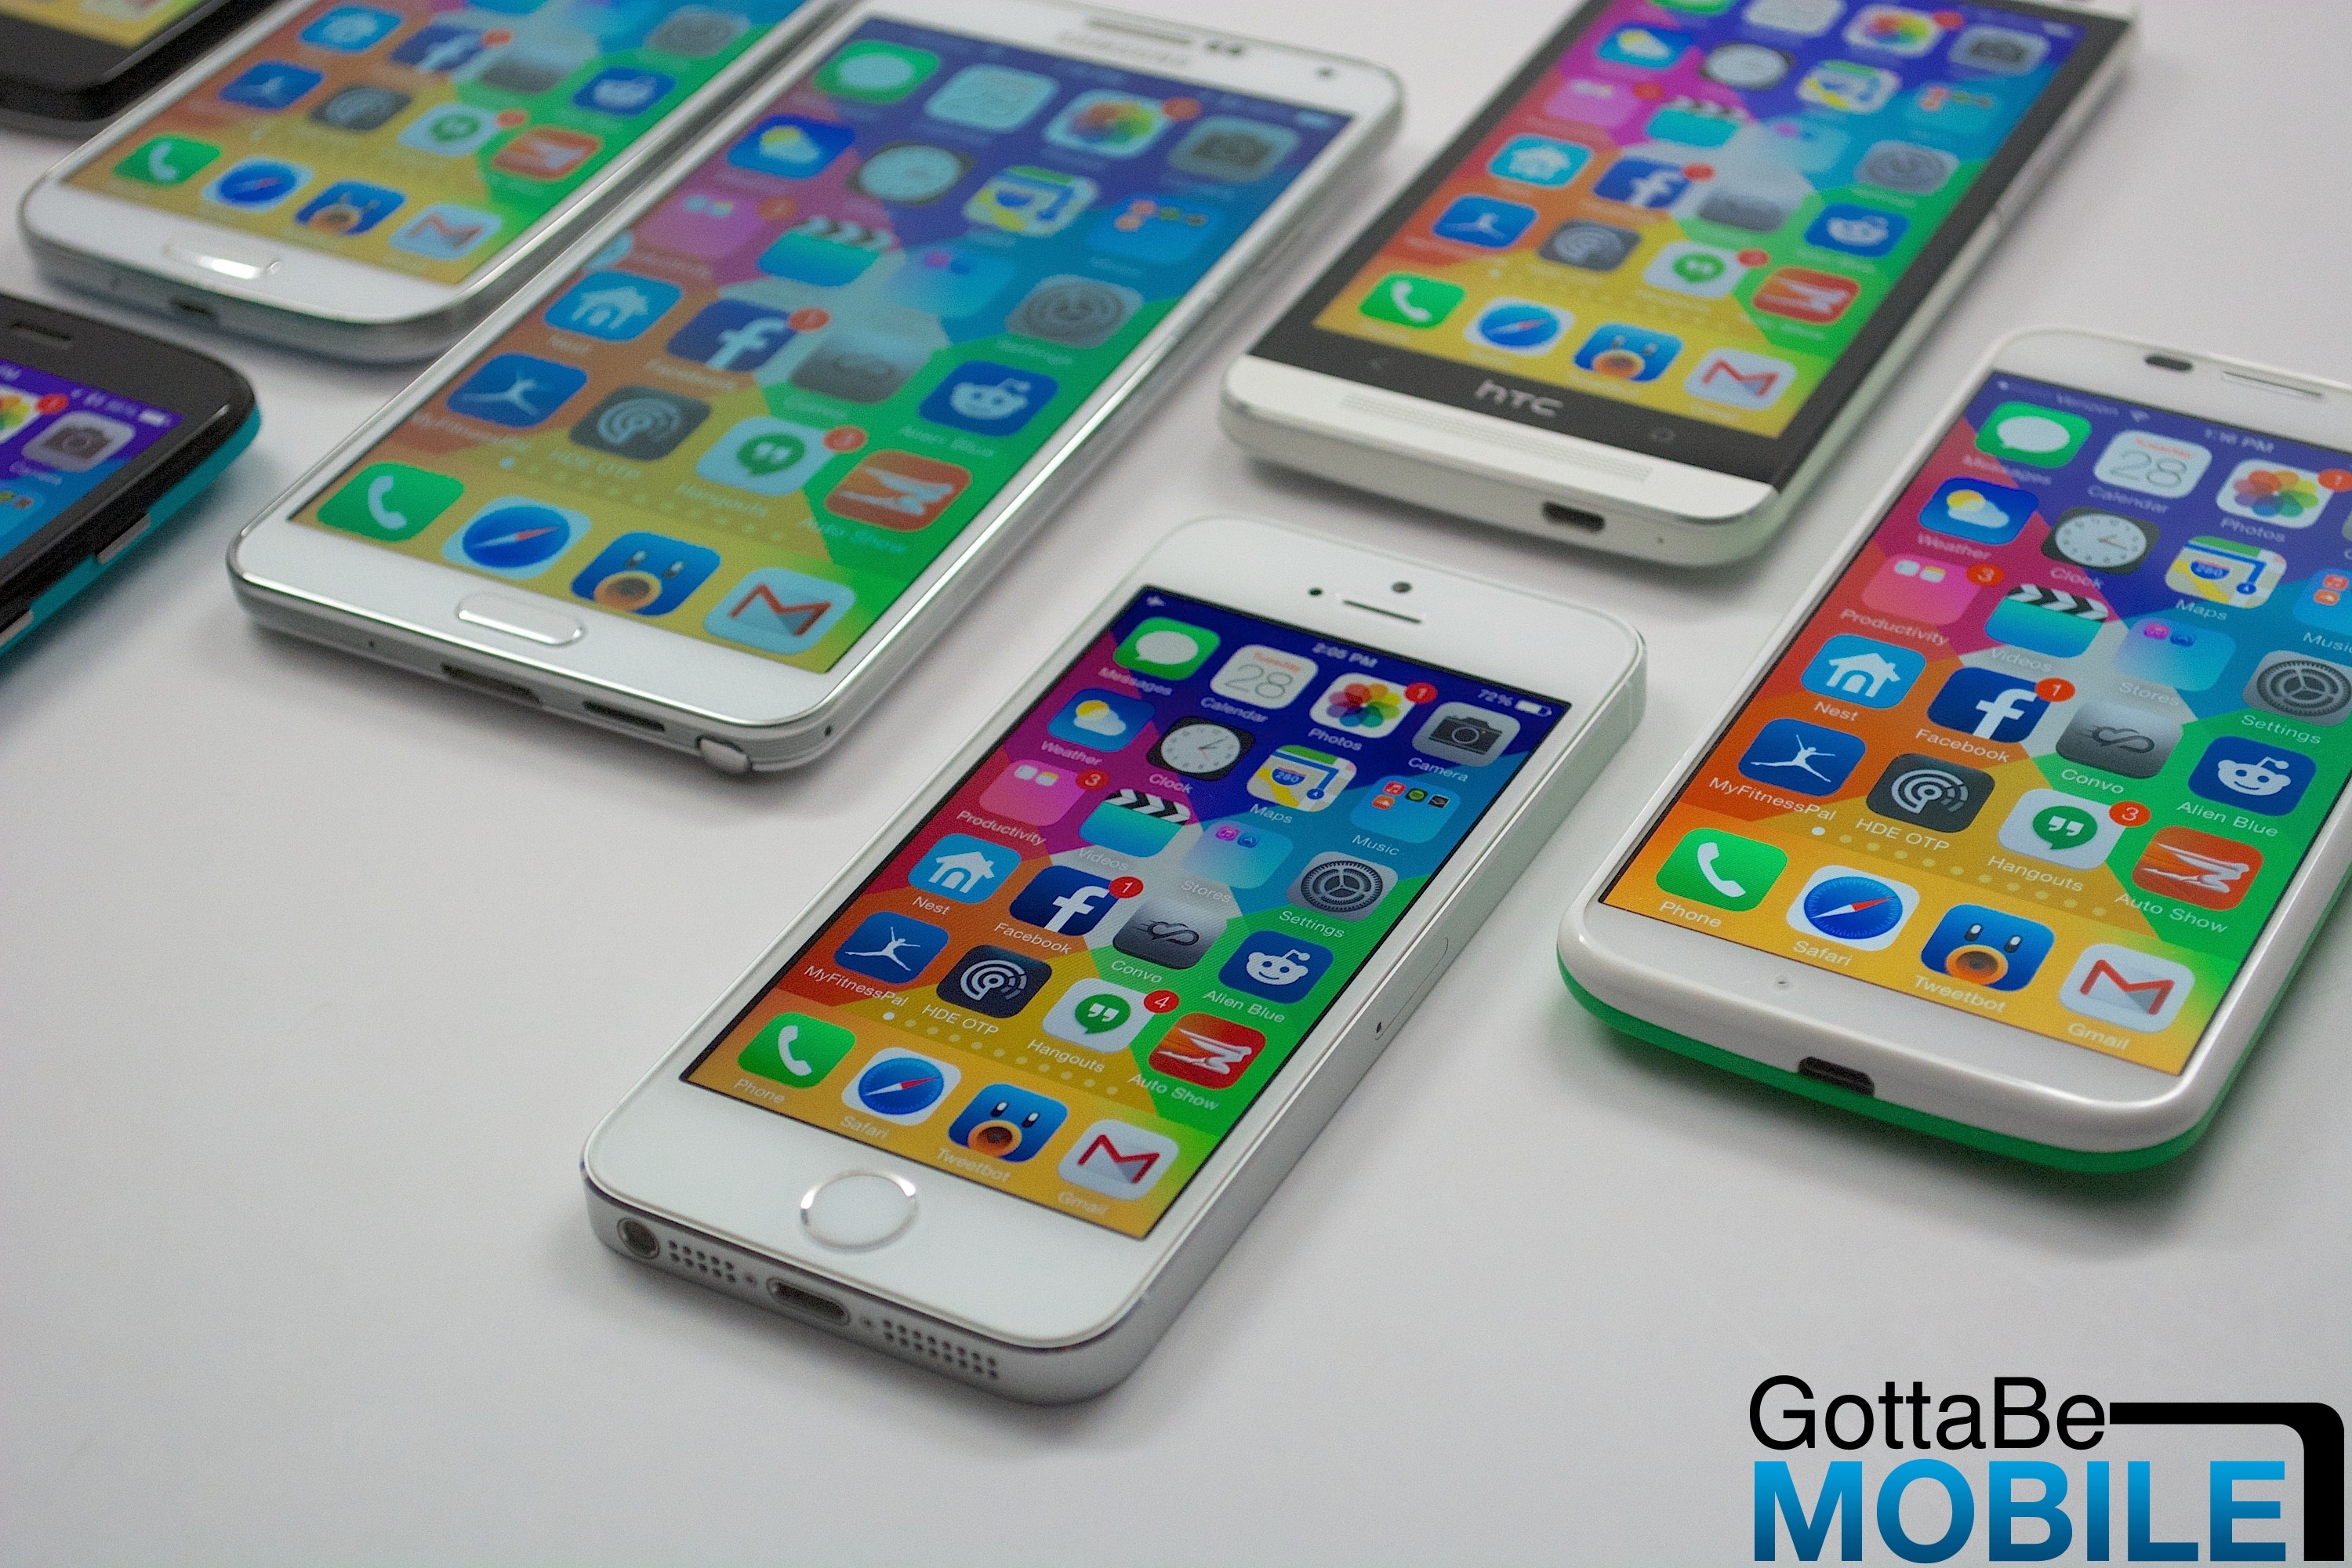 Take a look at the latest iPhone 6 rumors to learn everything we know so far.